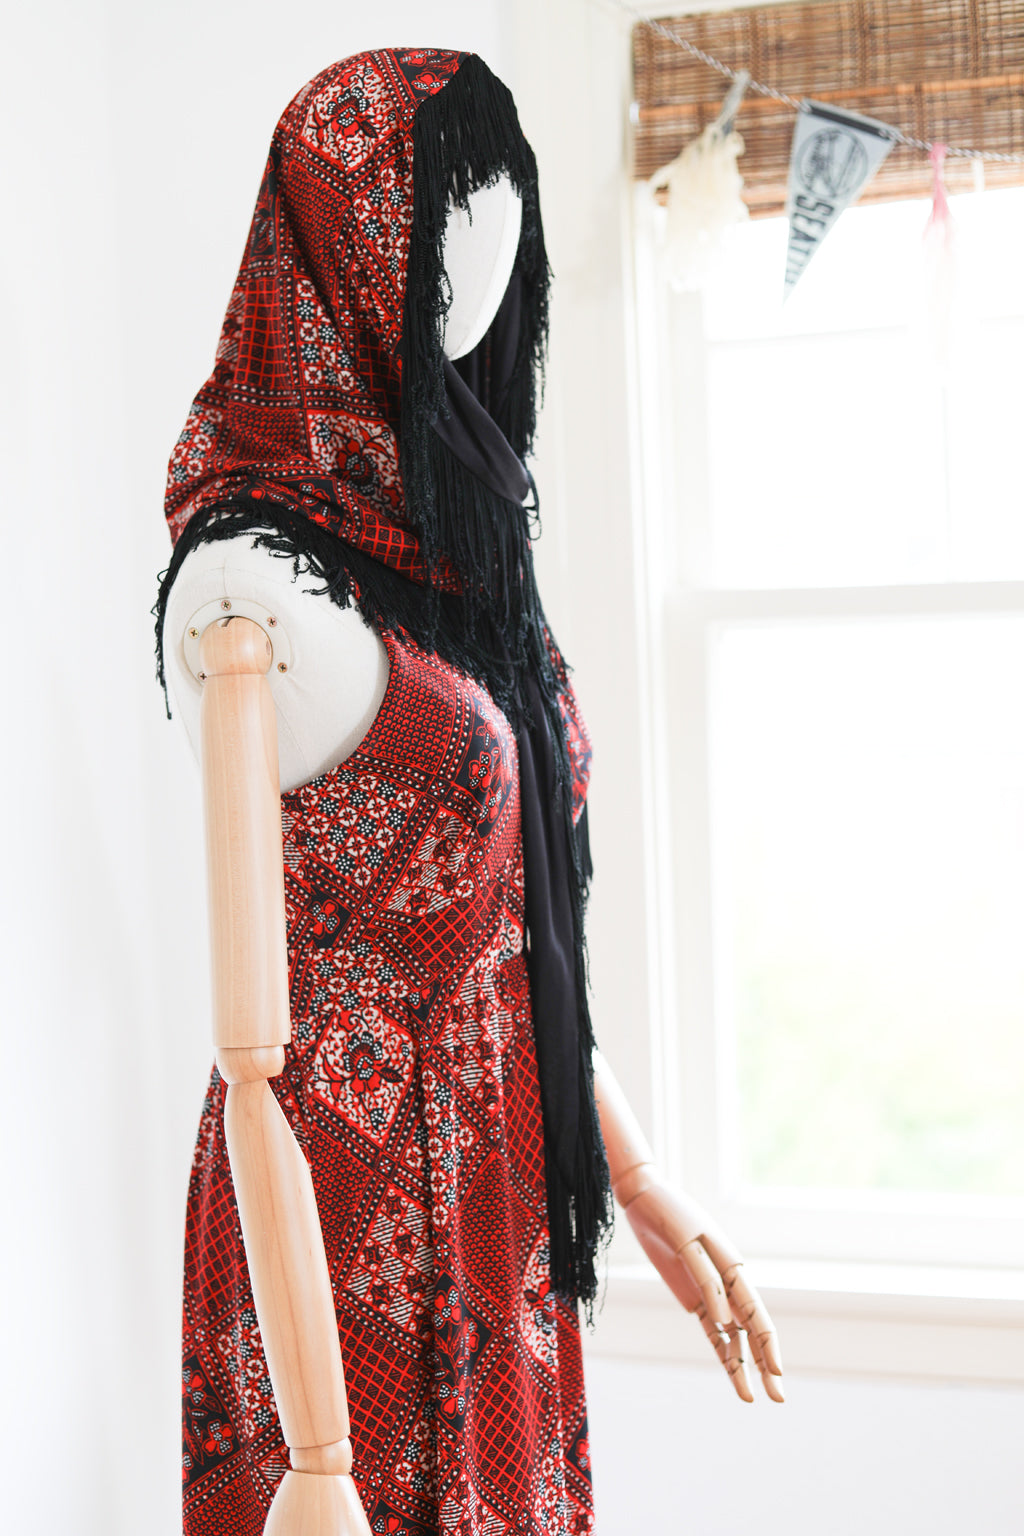 Vintage 1970s Dress + Fringed Shawl - FIERCE Lipstick Red Black Patchwork Maxi Gown w Caged Racerback + Matching Fringe Wrap! Size XS to S